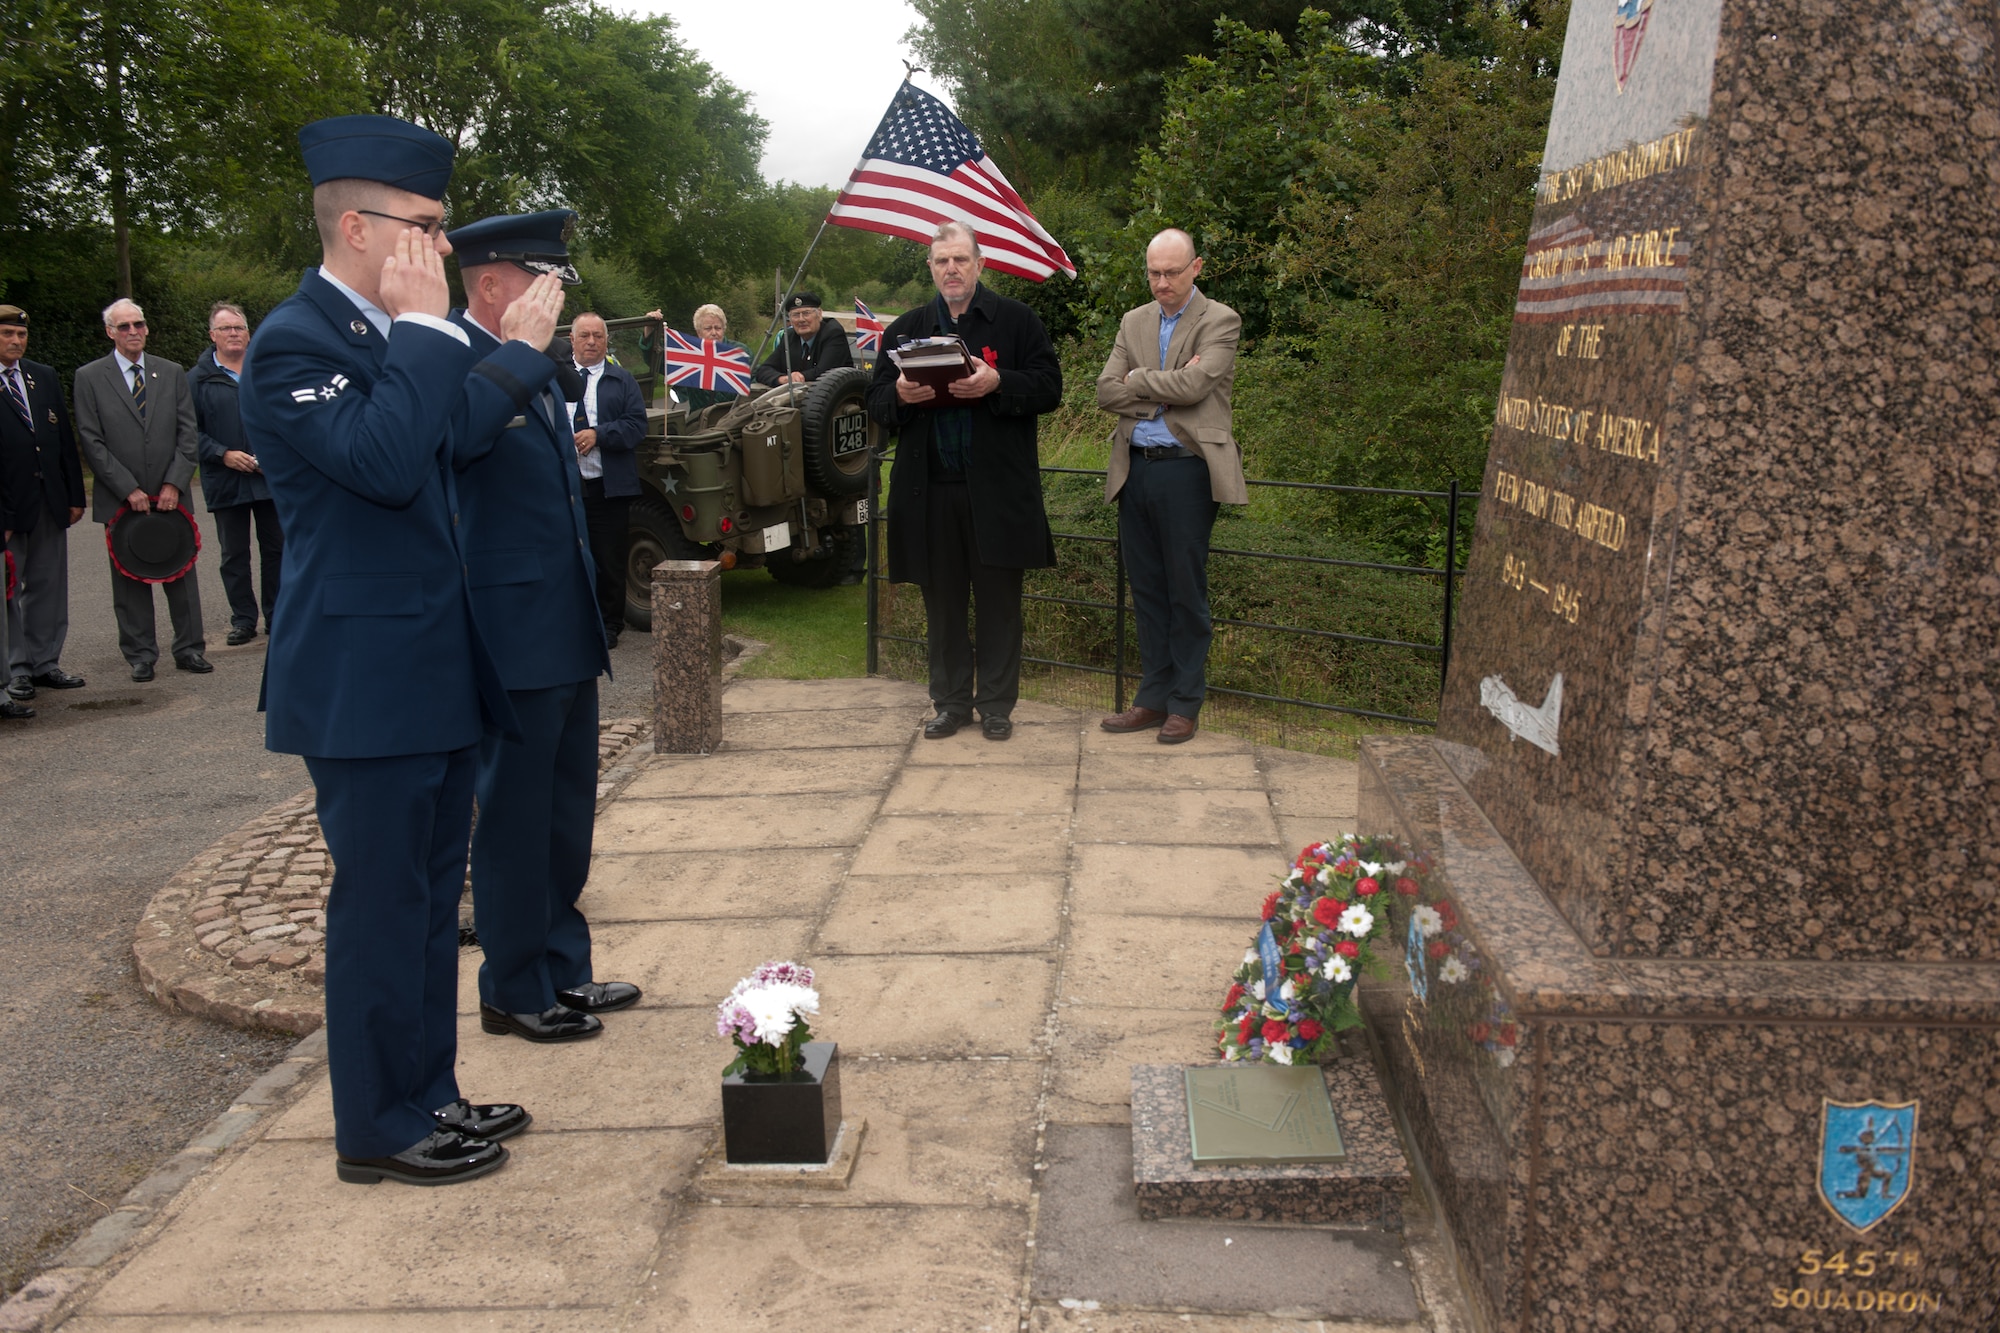 GRAFTON UNDERWOOD, United Kingdom – Maj. Gen. Stephen Wilson, Eighth Air Force commander, and Airman 1st Class Cody Lemon, 423rd Medical Squadron, pay their respects to Eighth Air Force Airmen at the memorial near Grafton Underwood Aug. 17. The day marked the 70th anniversary of the first Eighth Air Force bombers, from the 97th Bombardment Group (Heavy), participating in World War II which launched from Grafton Underwood. Col. Frank Armstrong, 97th BG commander, and the 340th Bomb Squadron commander Maj. Paul Tibbets (who later flew the Enola Gay to Hiroshima, Japan, on the first atomic bomb mission) piloted the lead aircraft of the group, Butcher Shop. In the leading aircraft of the second flight, Yankee Doodle, flew Gen. Ira C. Eaker, the commanding general of the VIII Bomber Command. (U.S. Air Force photo by Staff Sgt. Brian Stives)